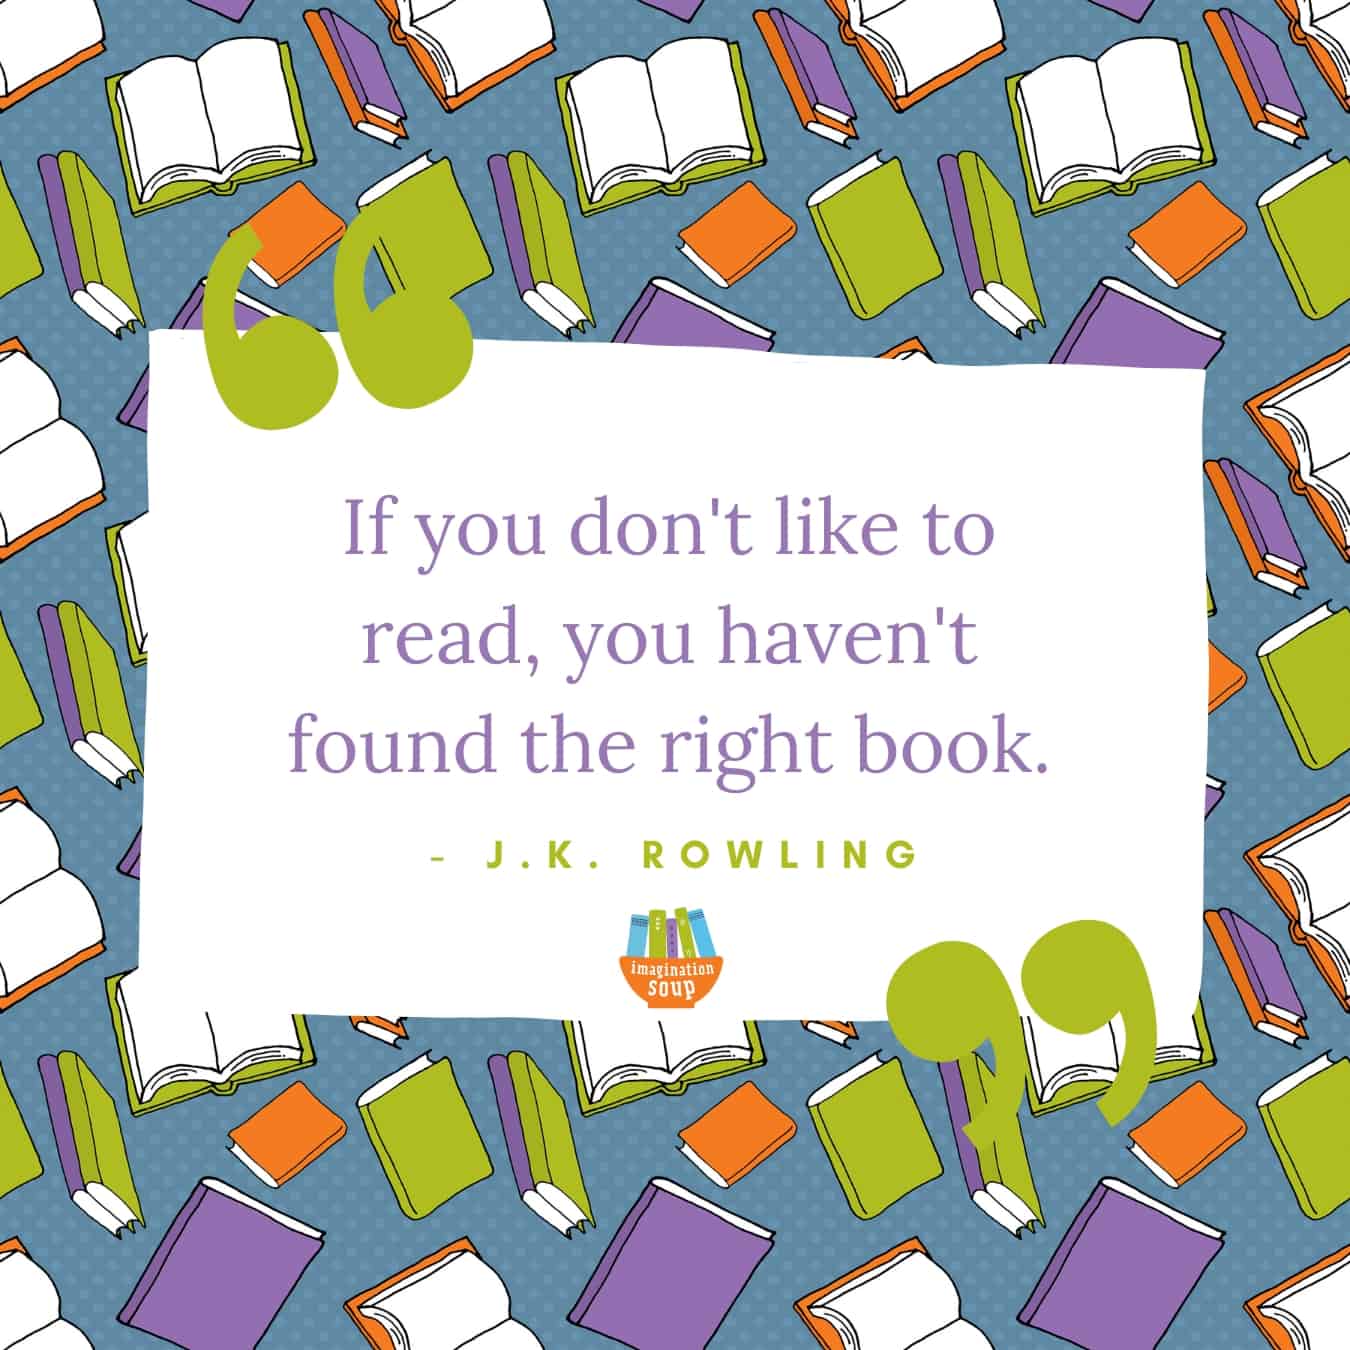 J.K. Rowling reading quote